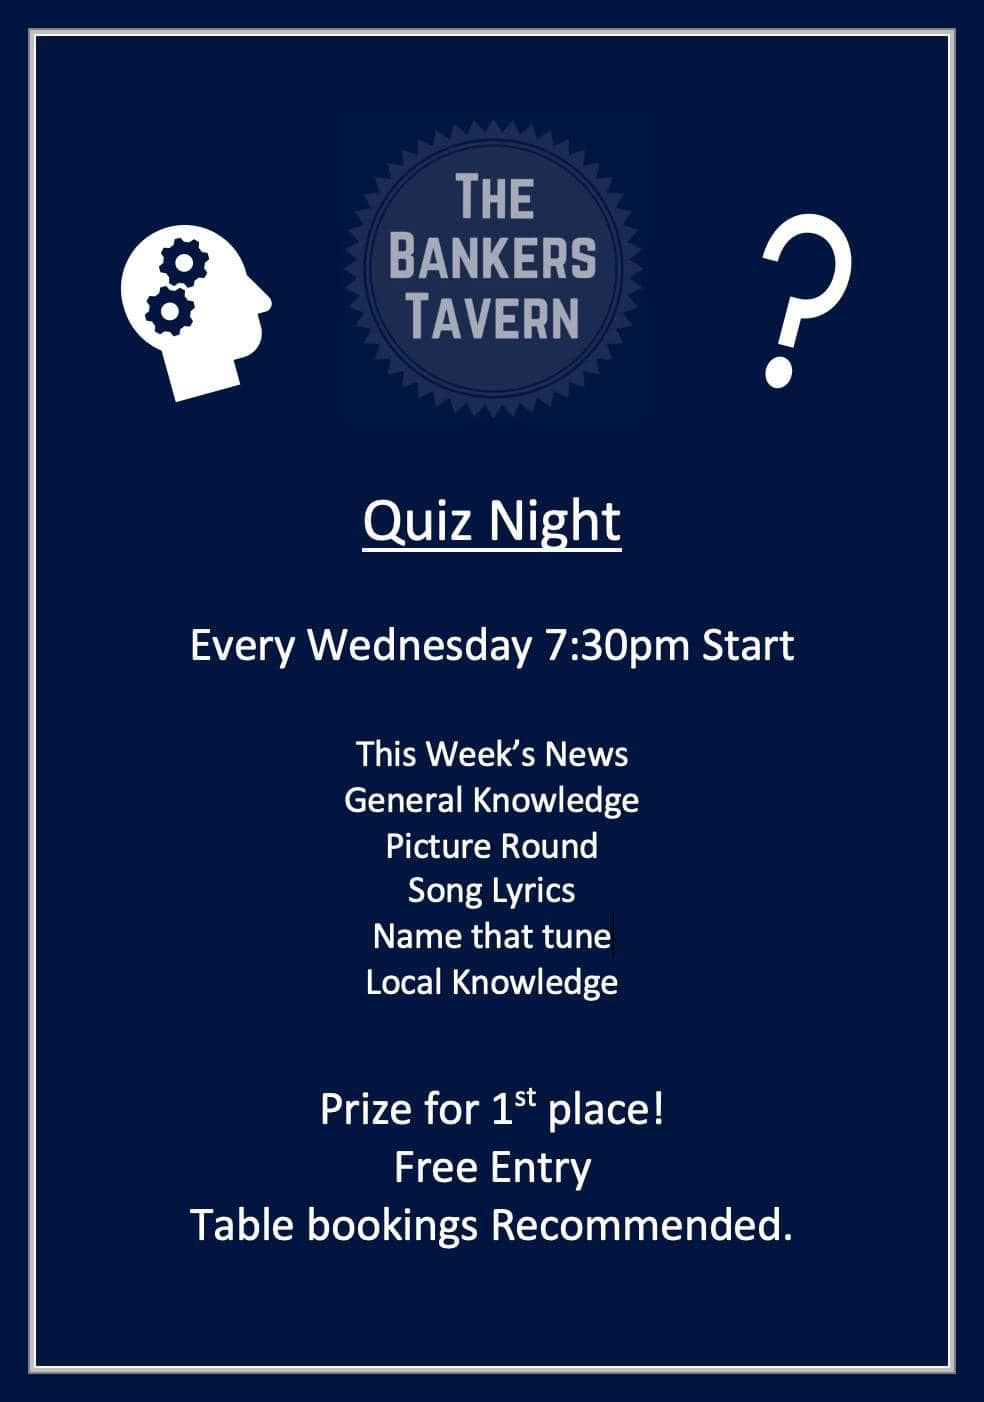 The Bankers Tavern Quiz Night